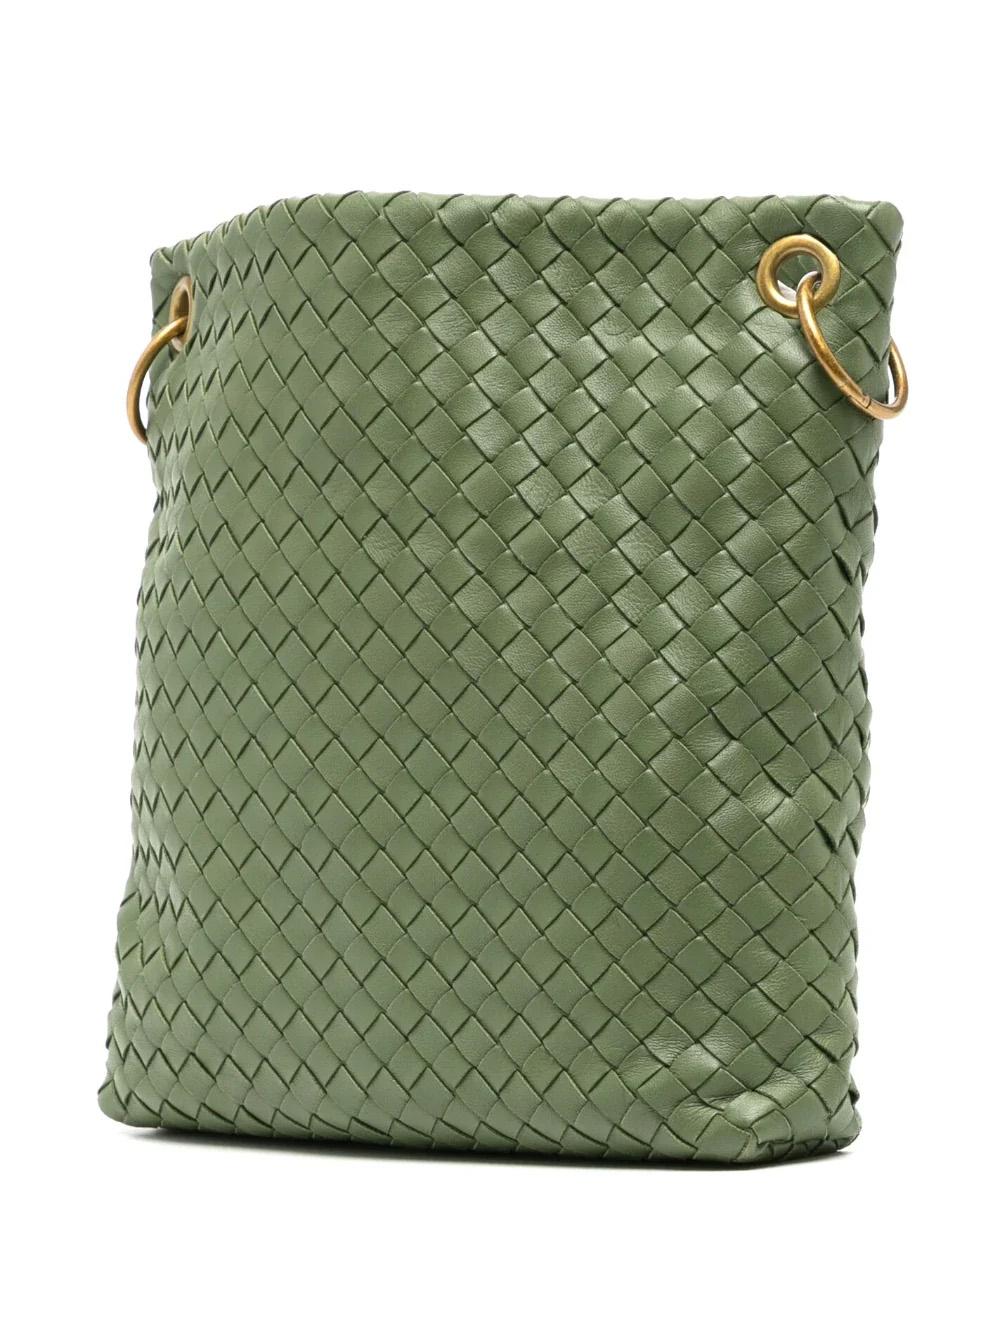 The Intrecciato Crossbody Bag is crafted from premium pistachio green leather, with signature Intrecciato weaved detailing and gold-tone hardware. It has an adjustable shoulder strap and a spacious main compartment that make it a perfect crossbody